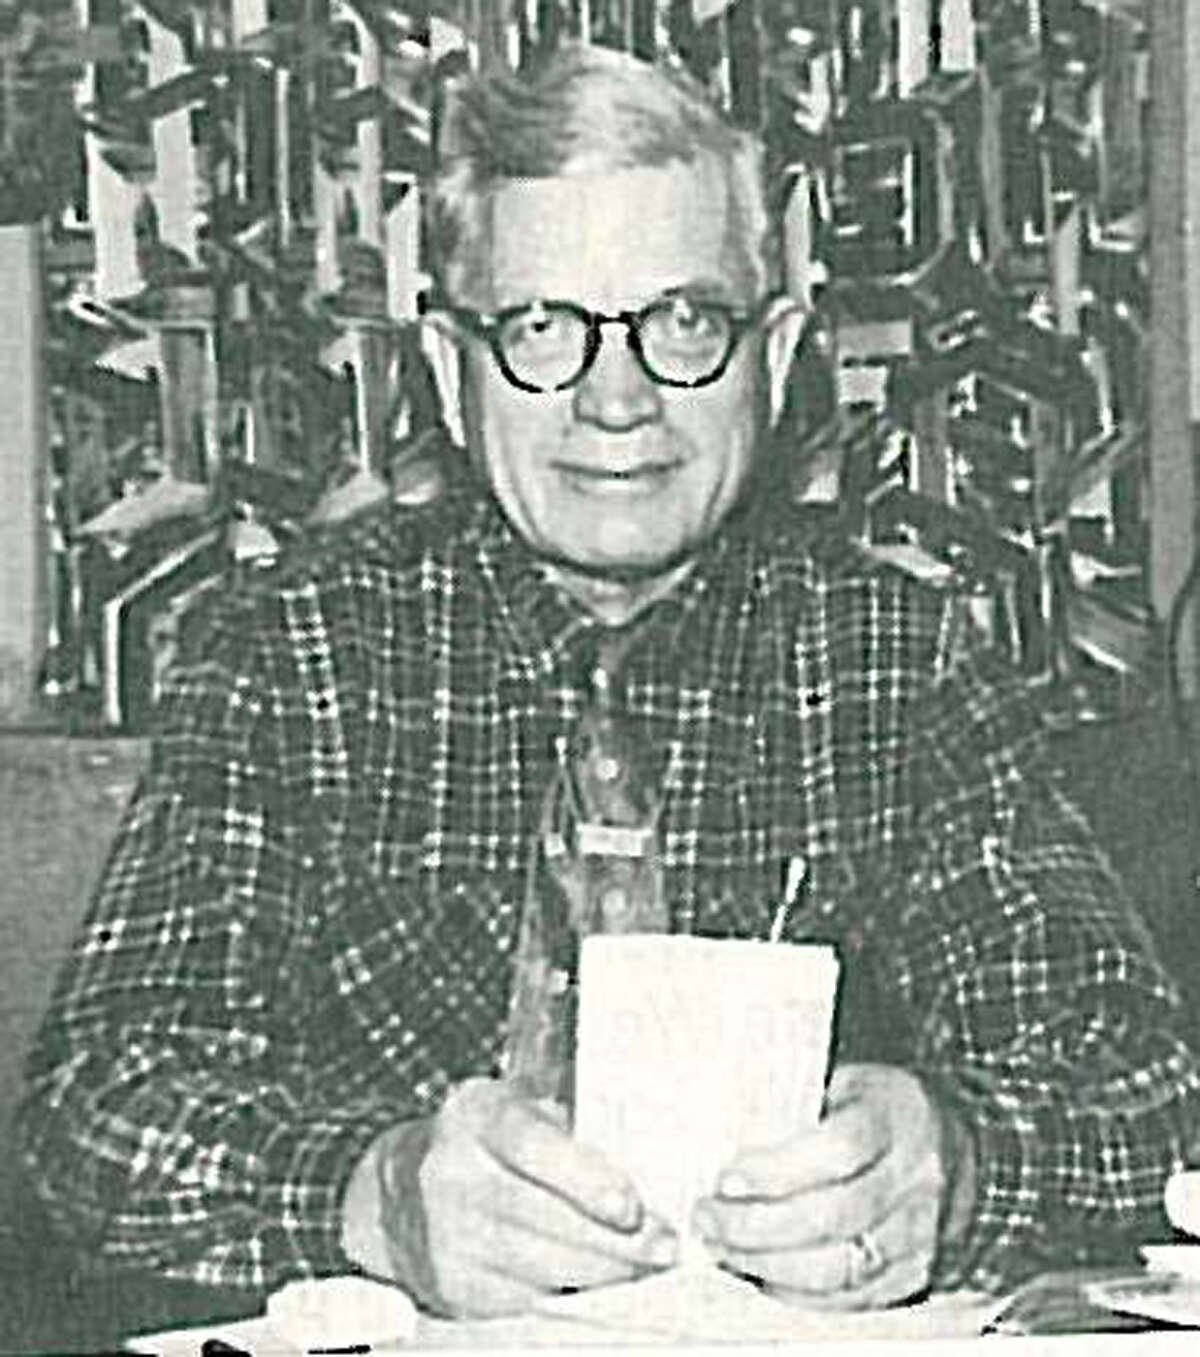 O. Etheridge in his later years. A former owner of The Courier, he later got his law degree and practiced law in Conroe from 1934 up until his death in Dec. 1977.